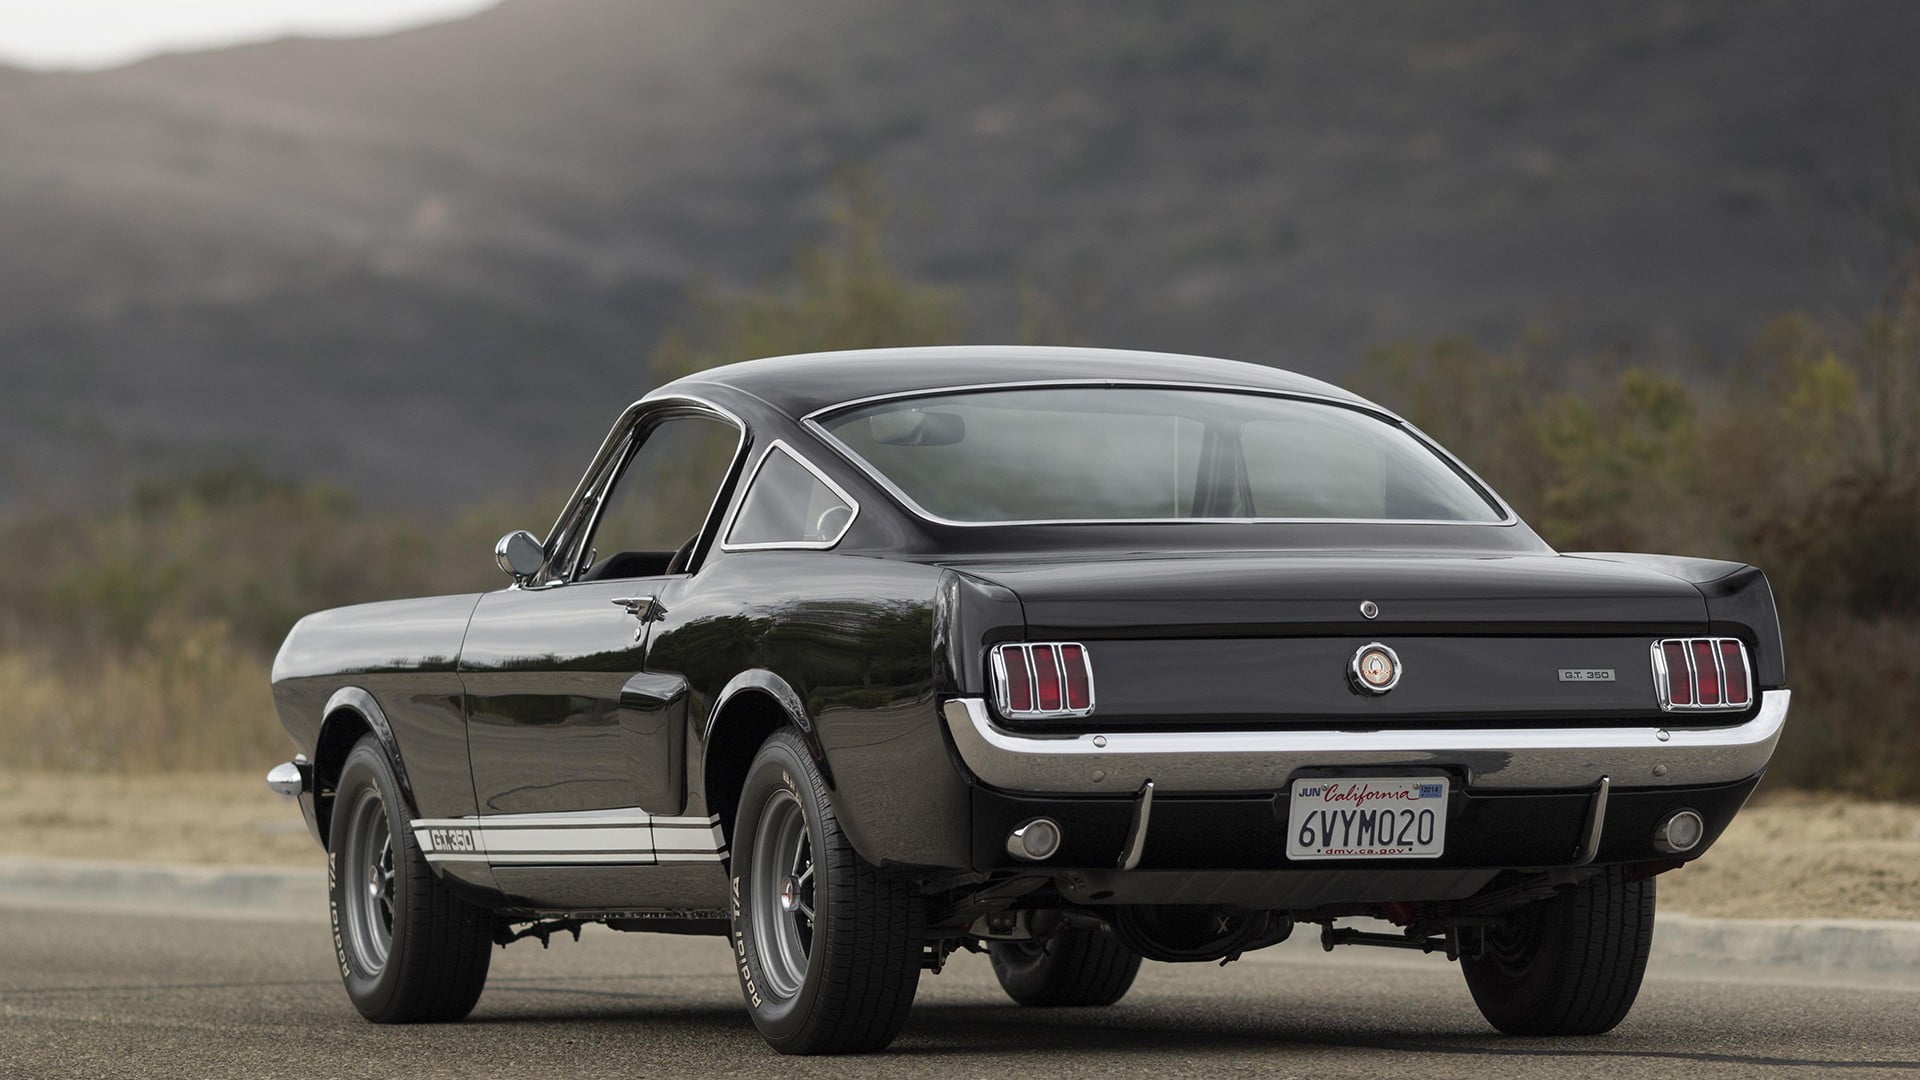 Black Ford Mustang Gt Coupe Car Ford Mustang Shelby Shelby Gt350 Hd Wallpaper Wallpaper Flare